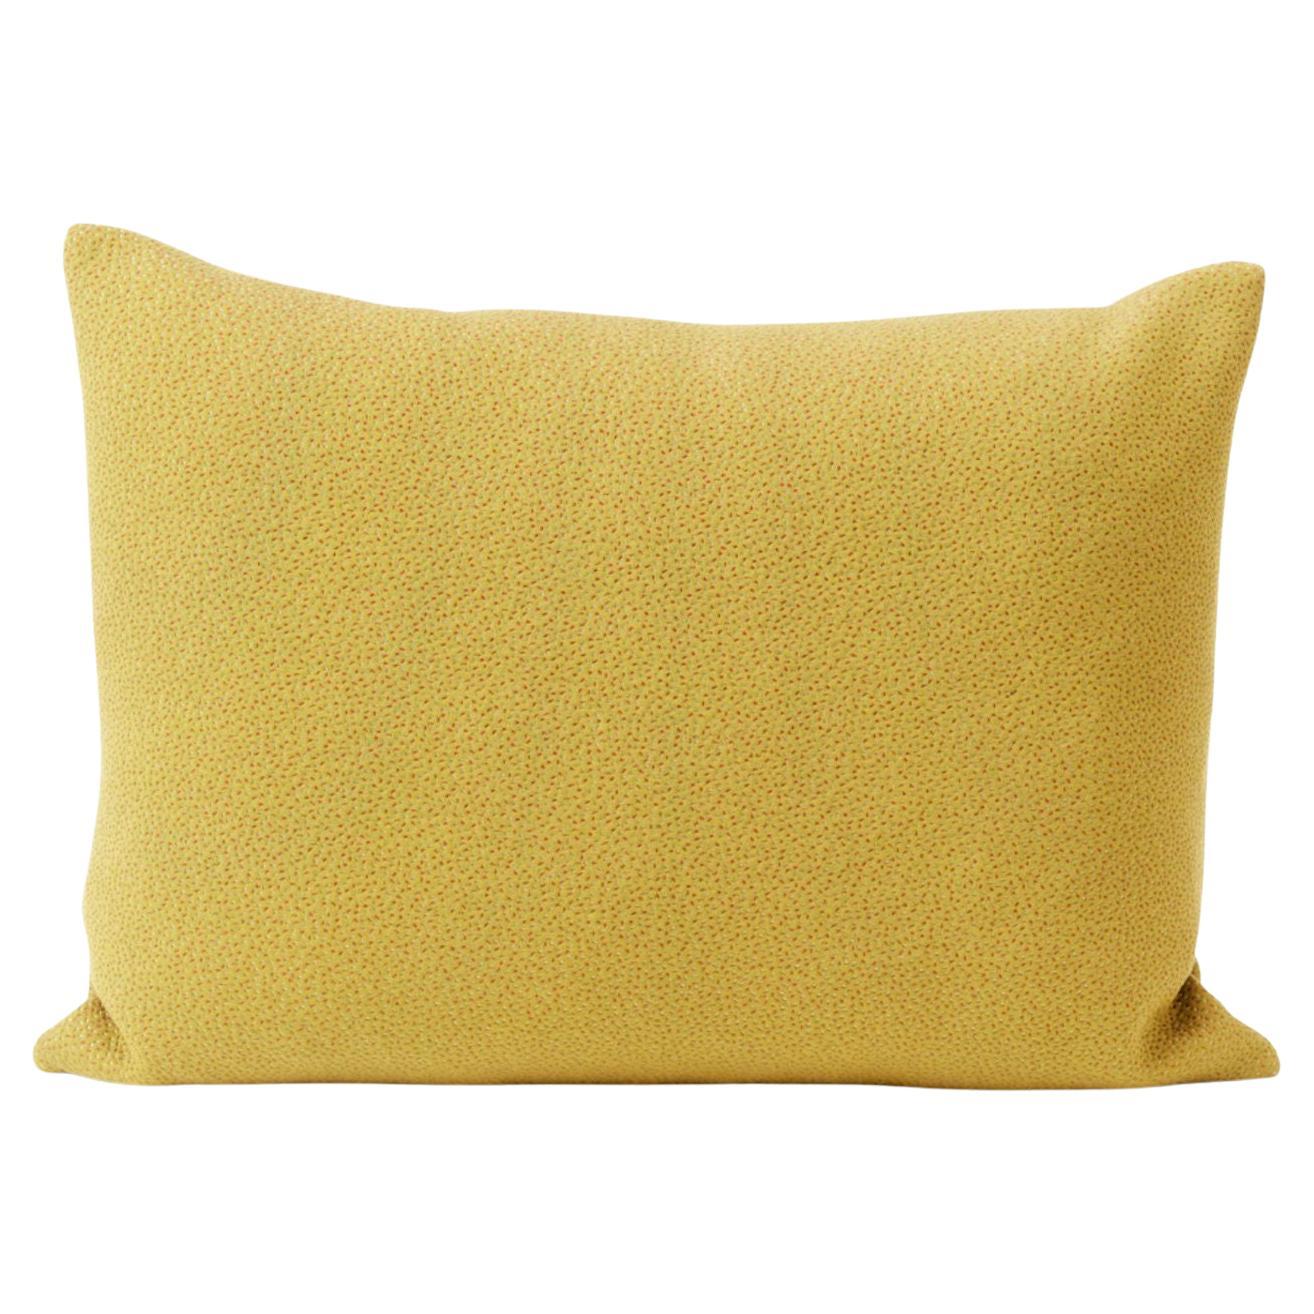 Galore Cushion Square Sprinkles Desert Yellow by Warm Nordic